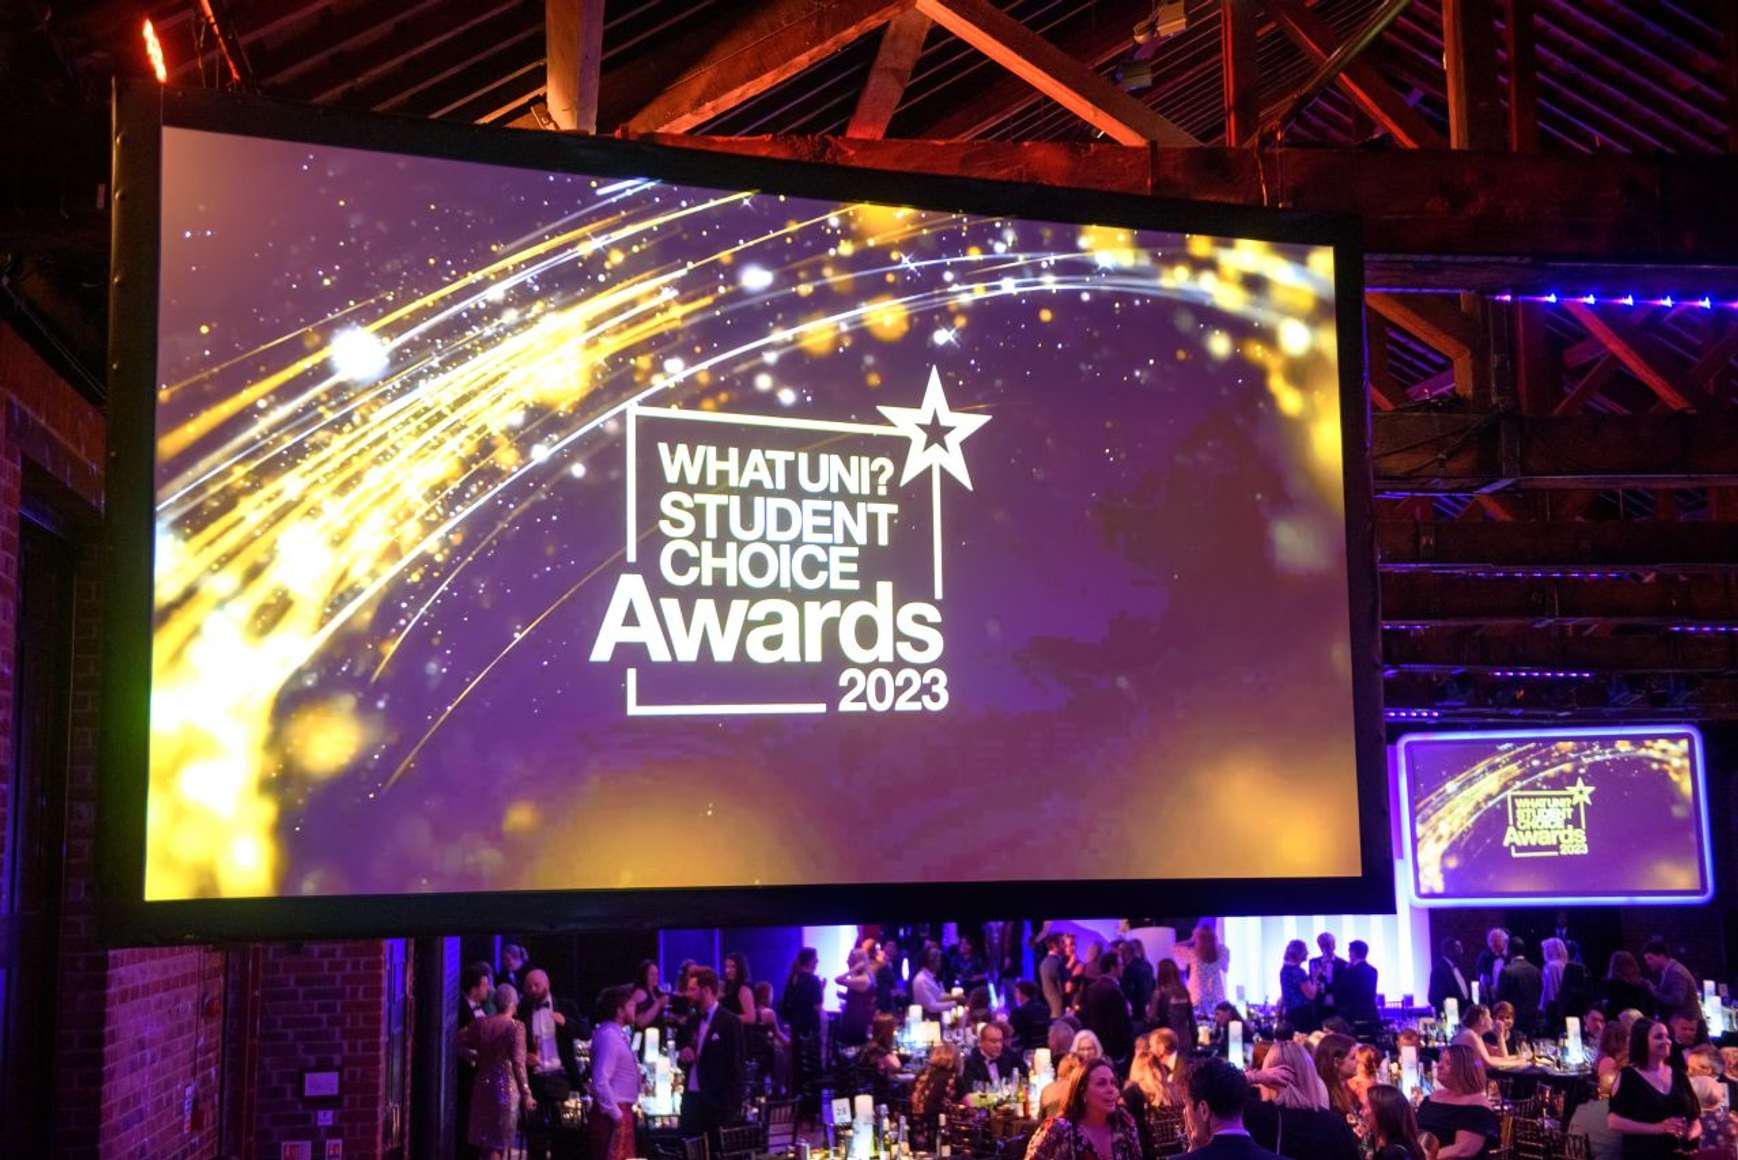 A large display screen featuring the WhatUni awards logo